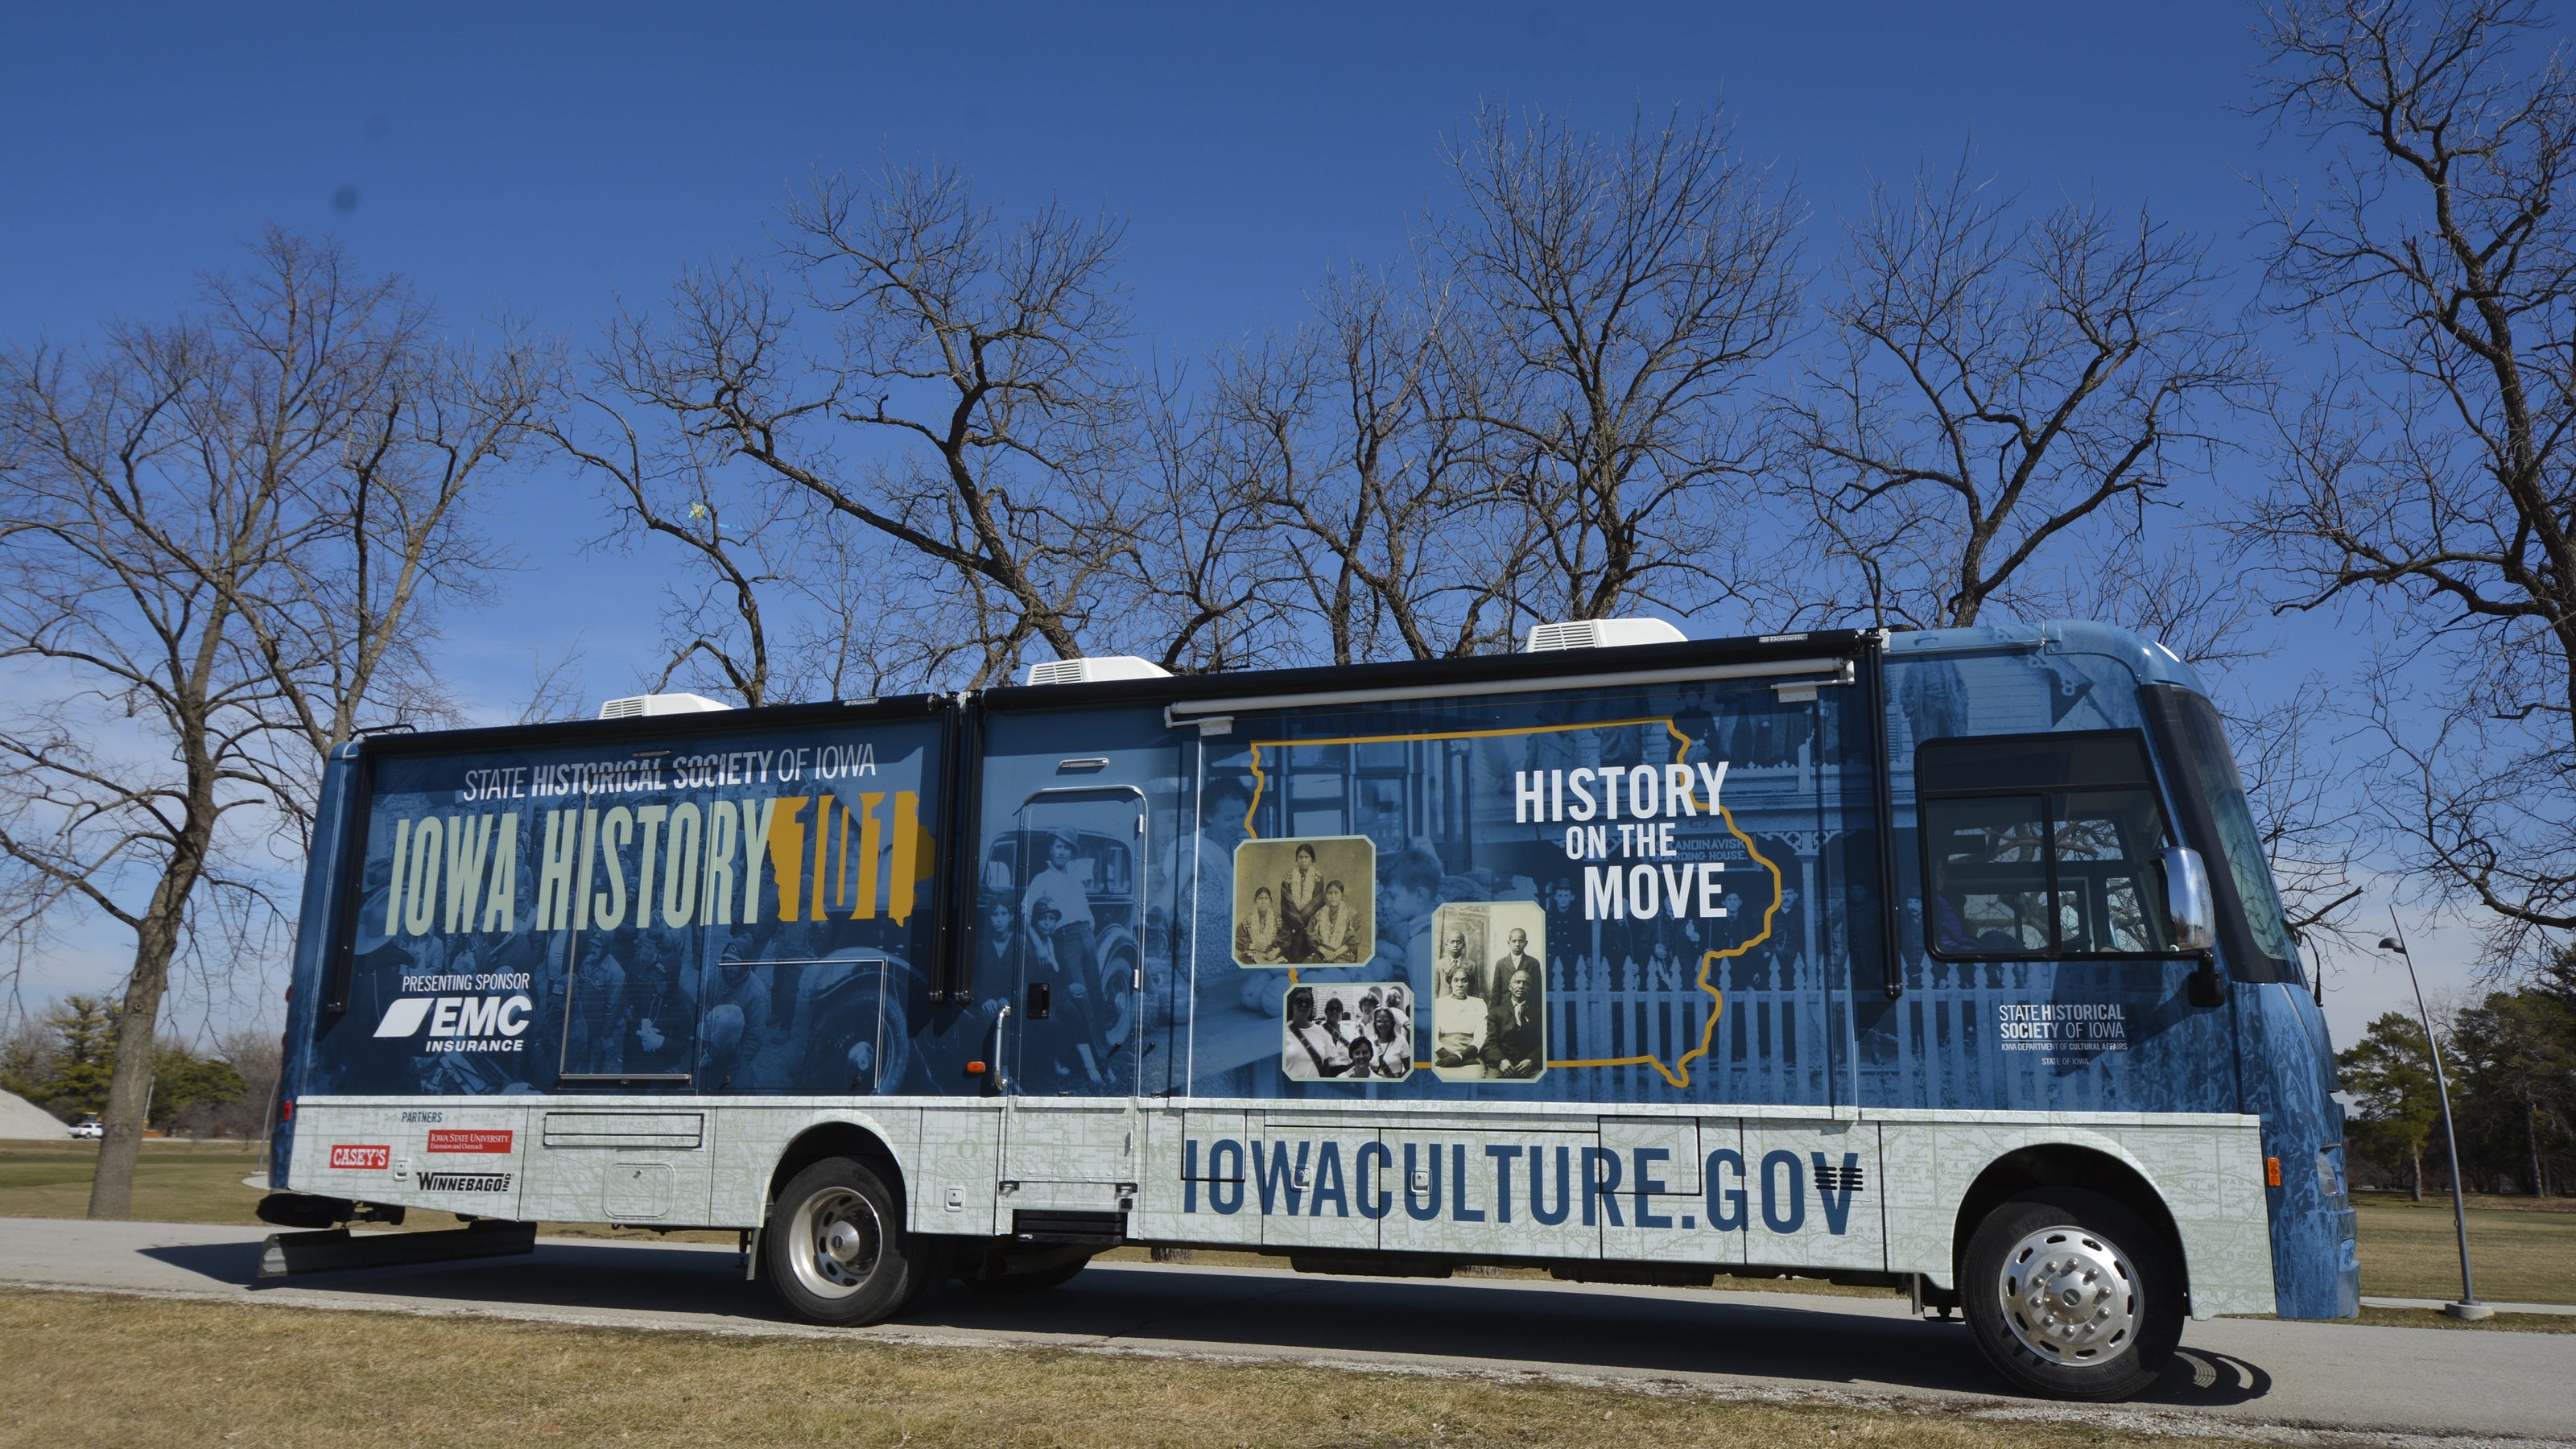 Mobile museum hits the road, packed with centuries of Iowa history